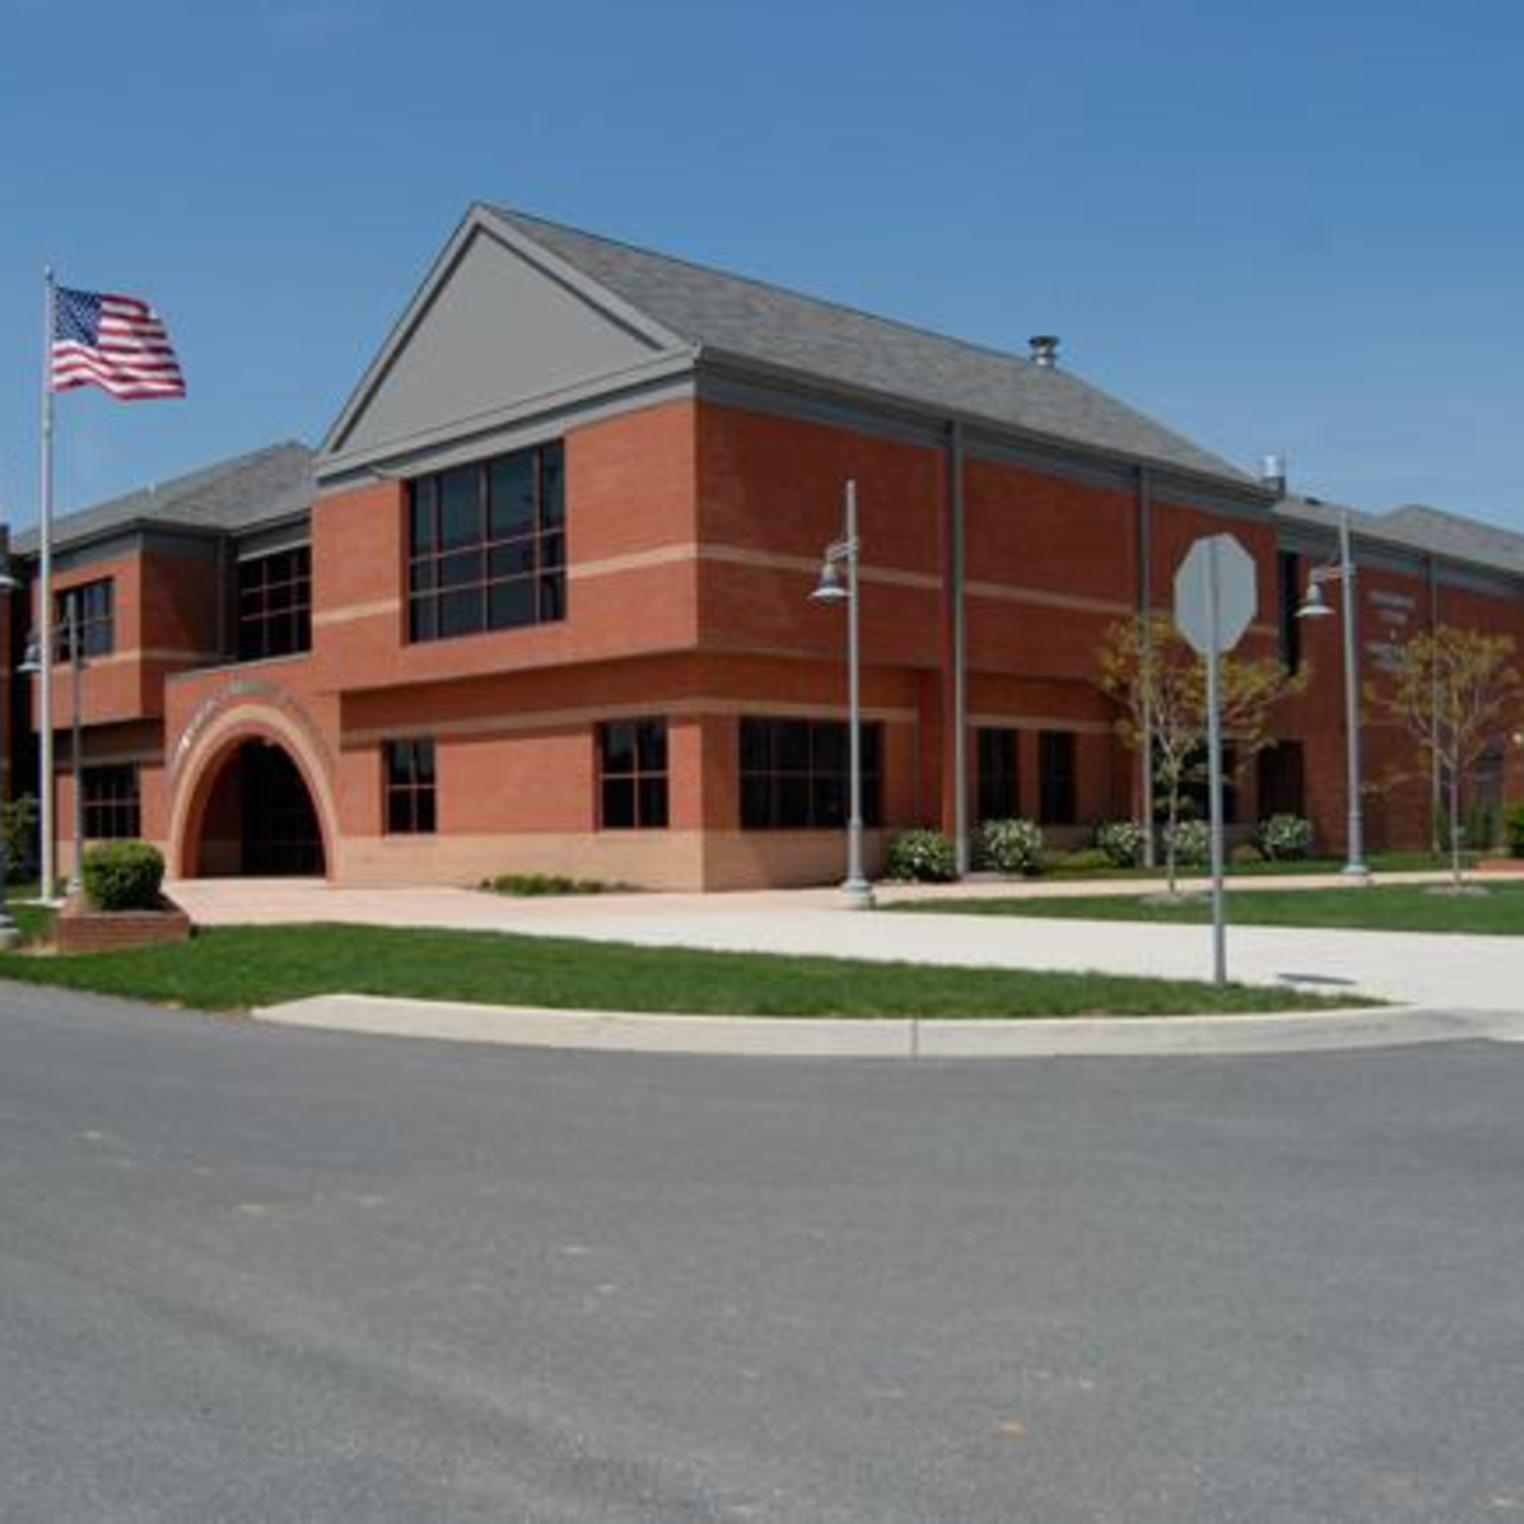 Exterior View of the Conference Center at Shippensburg University